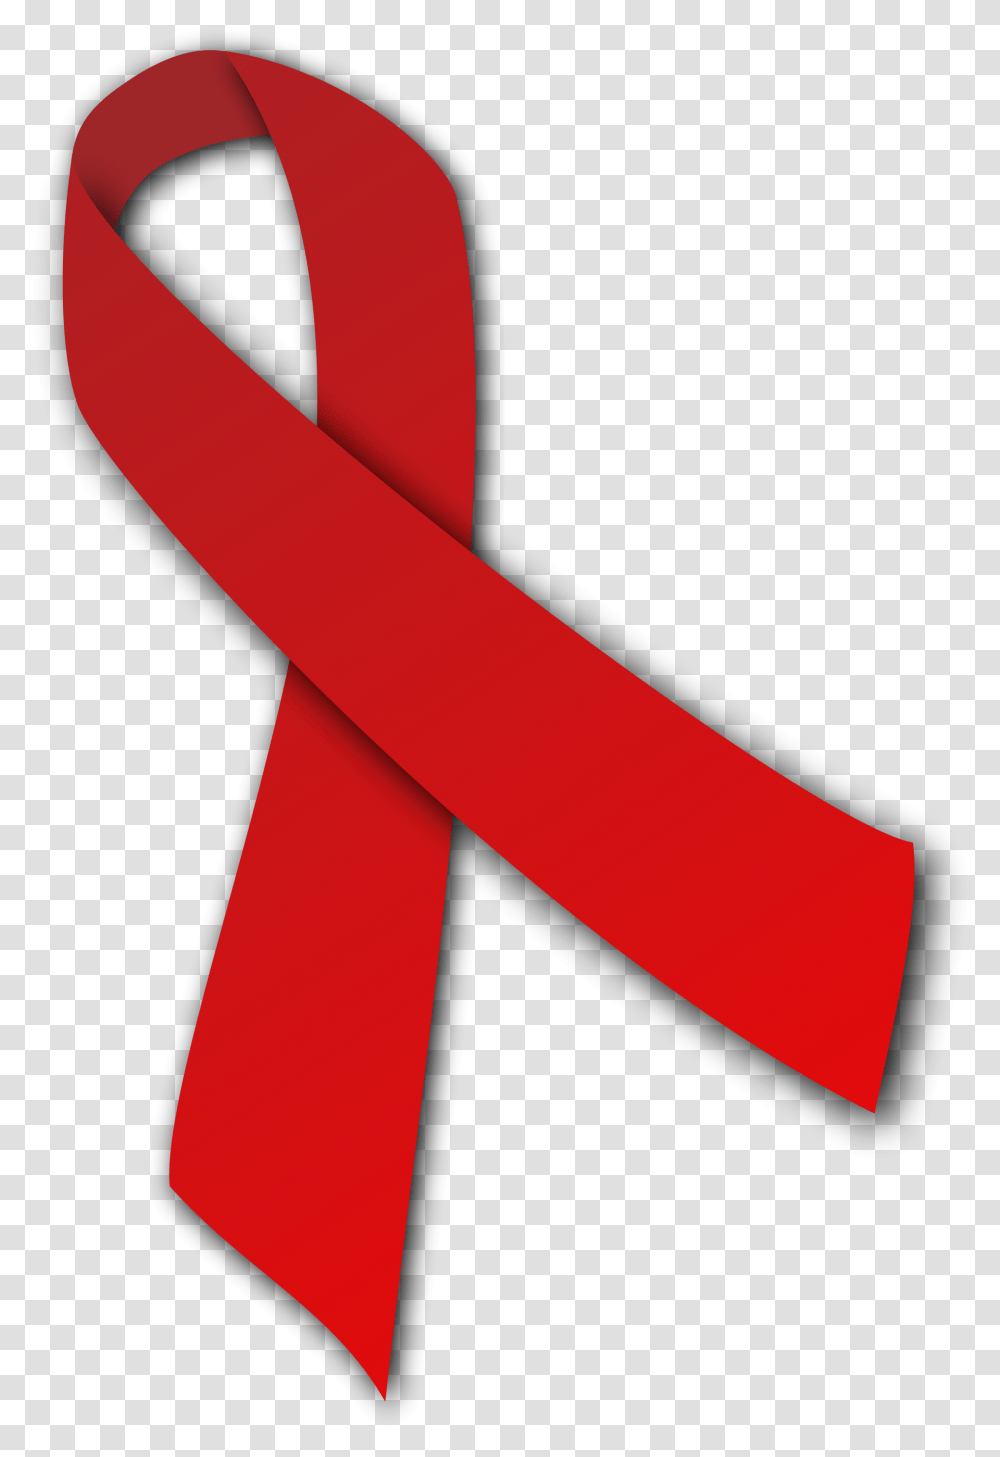 Red Ribbon Image Background Clip Art Aids Ribbon, Sash, Tie, Accessories, Accessory Transparent Png